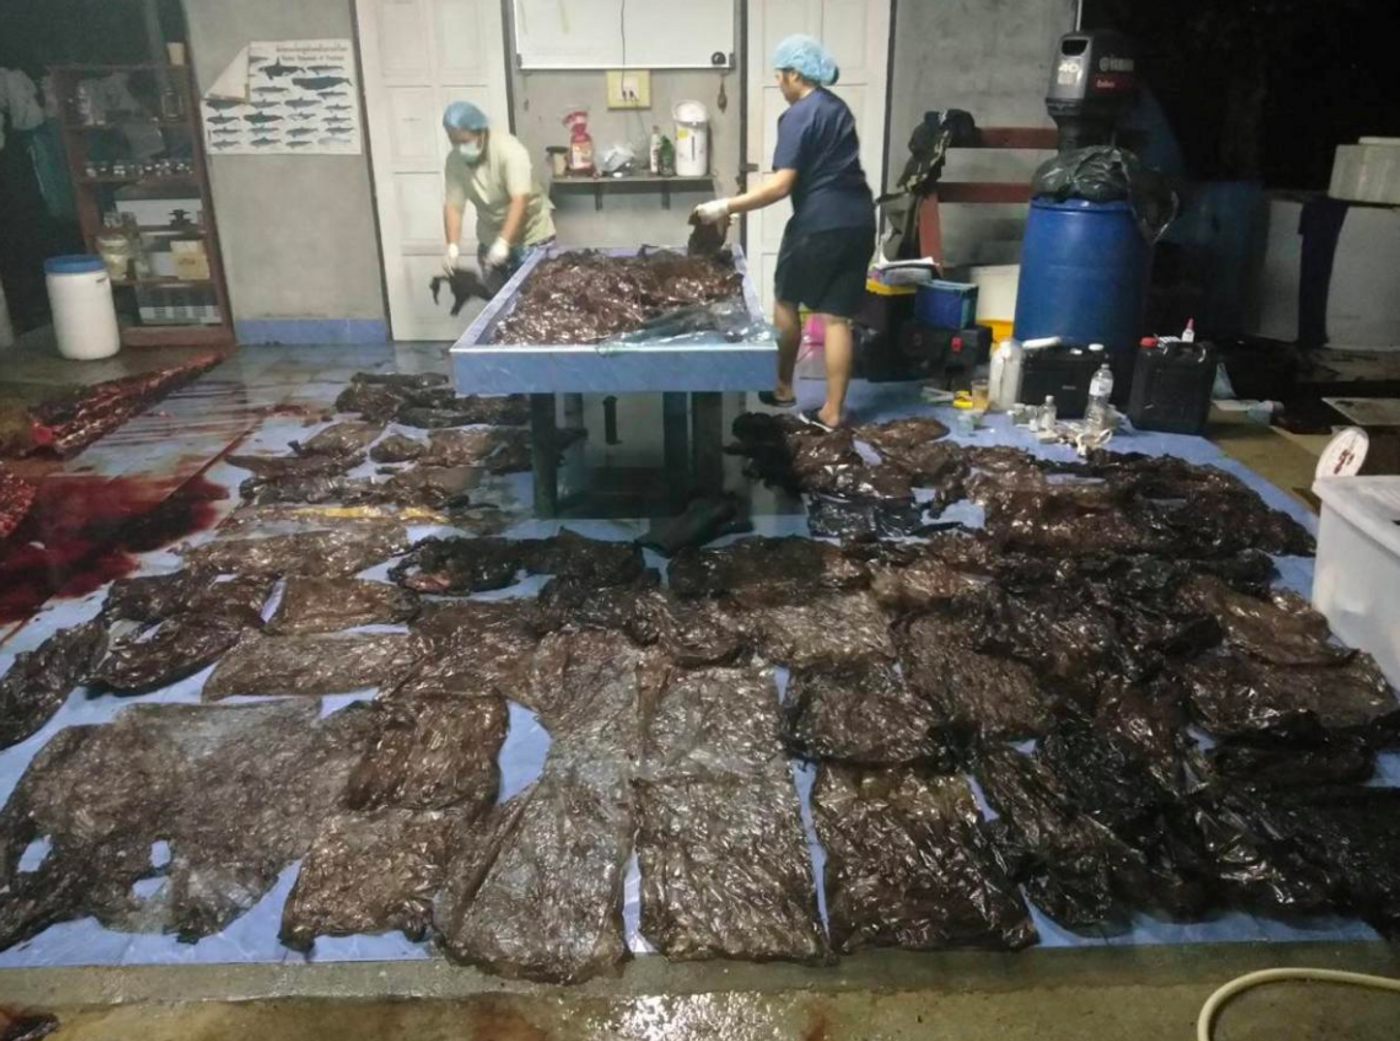 All the trash found in the whale's stomach during the autopsy.